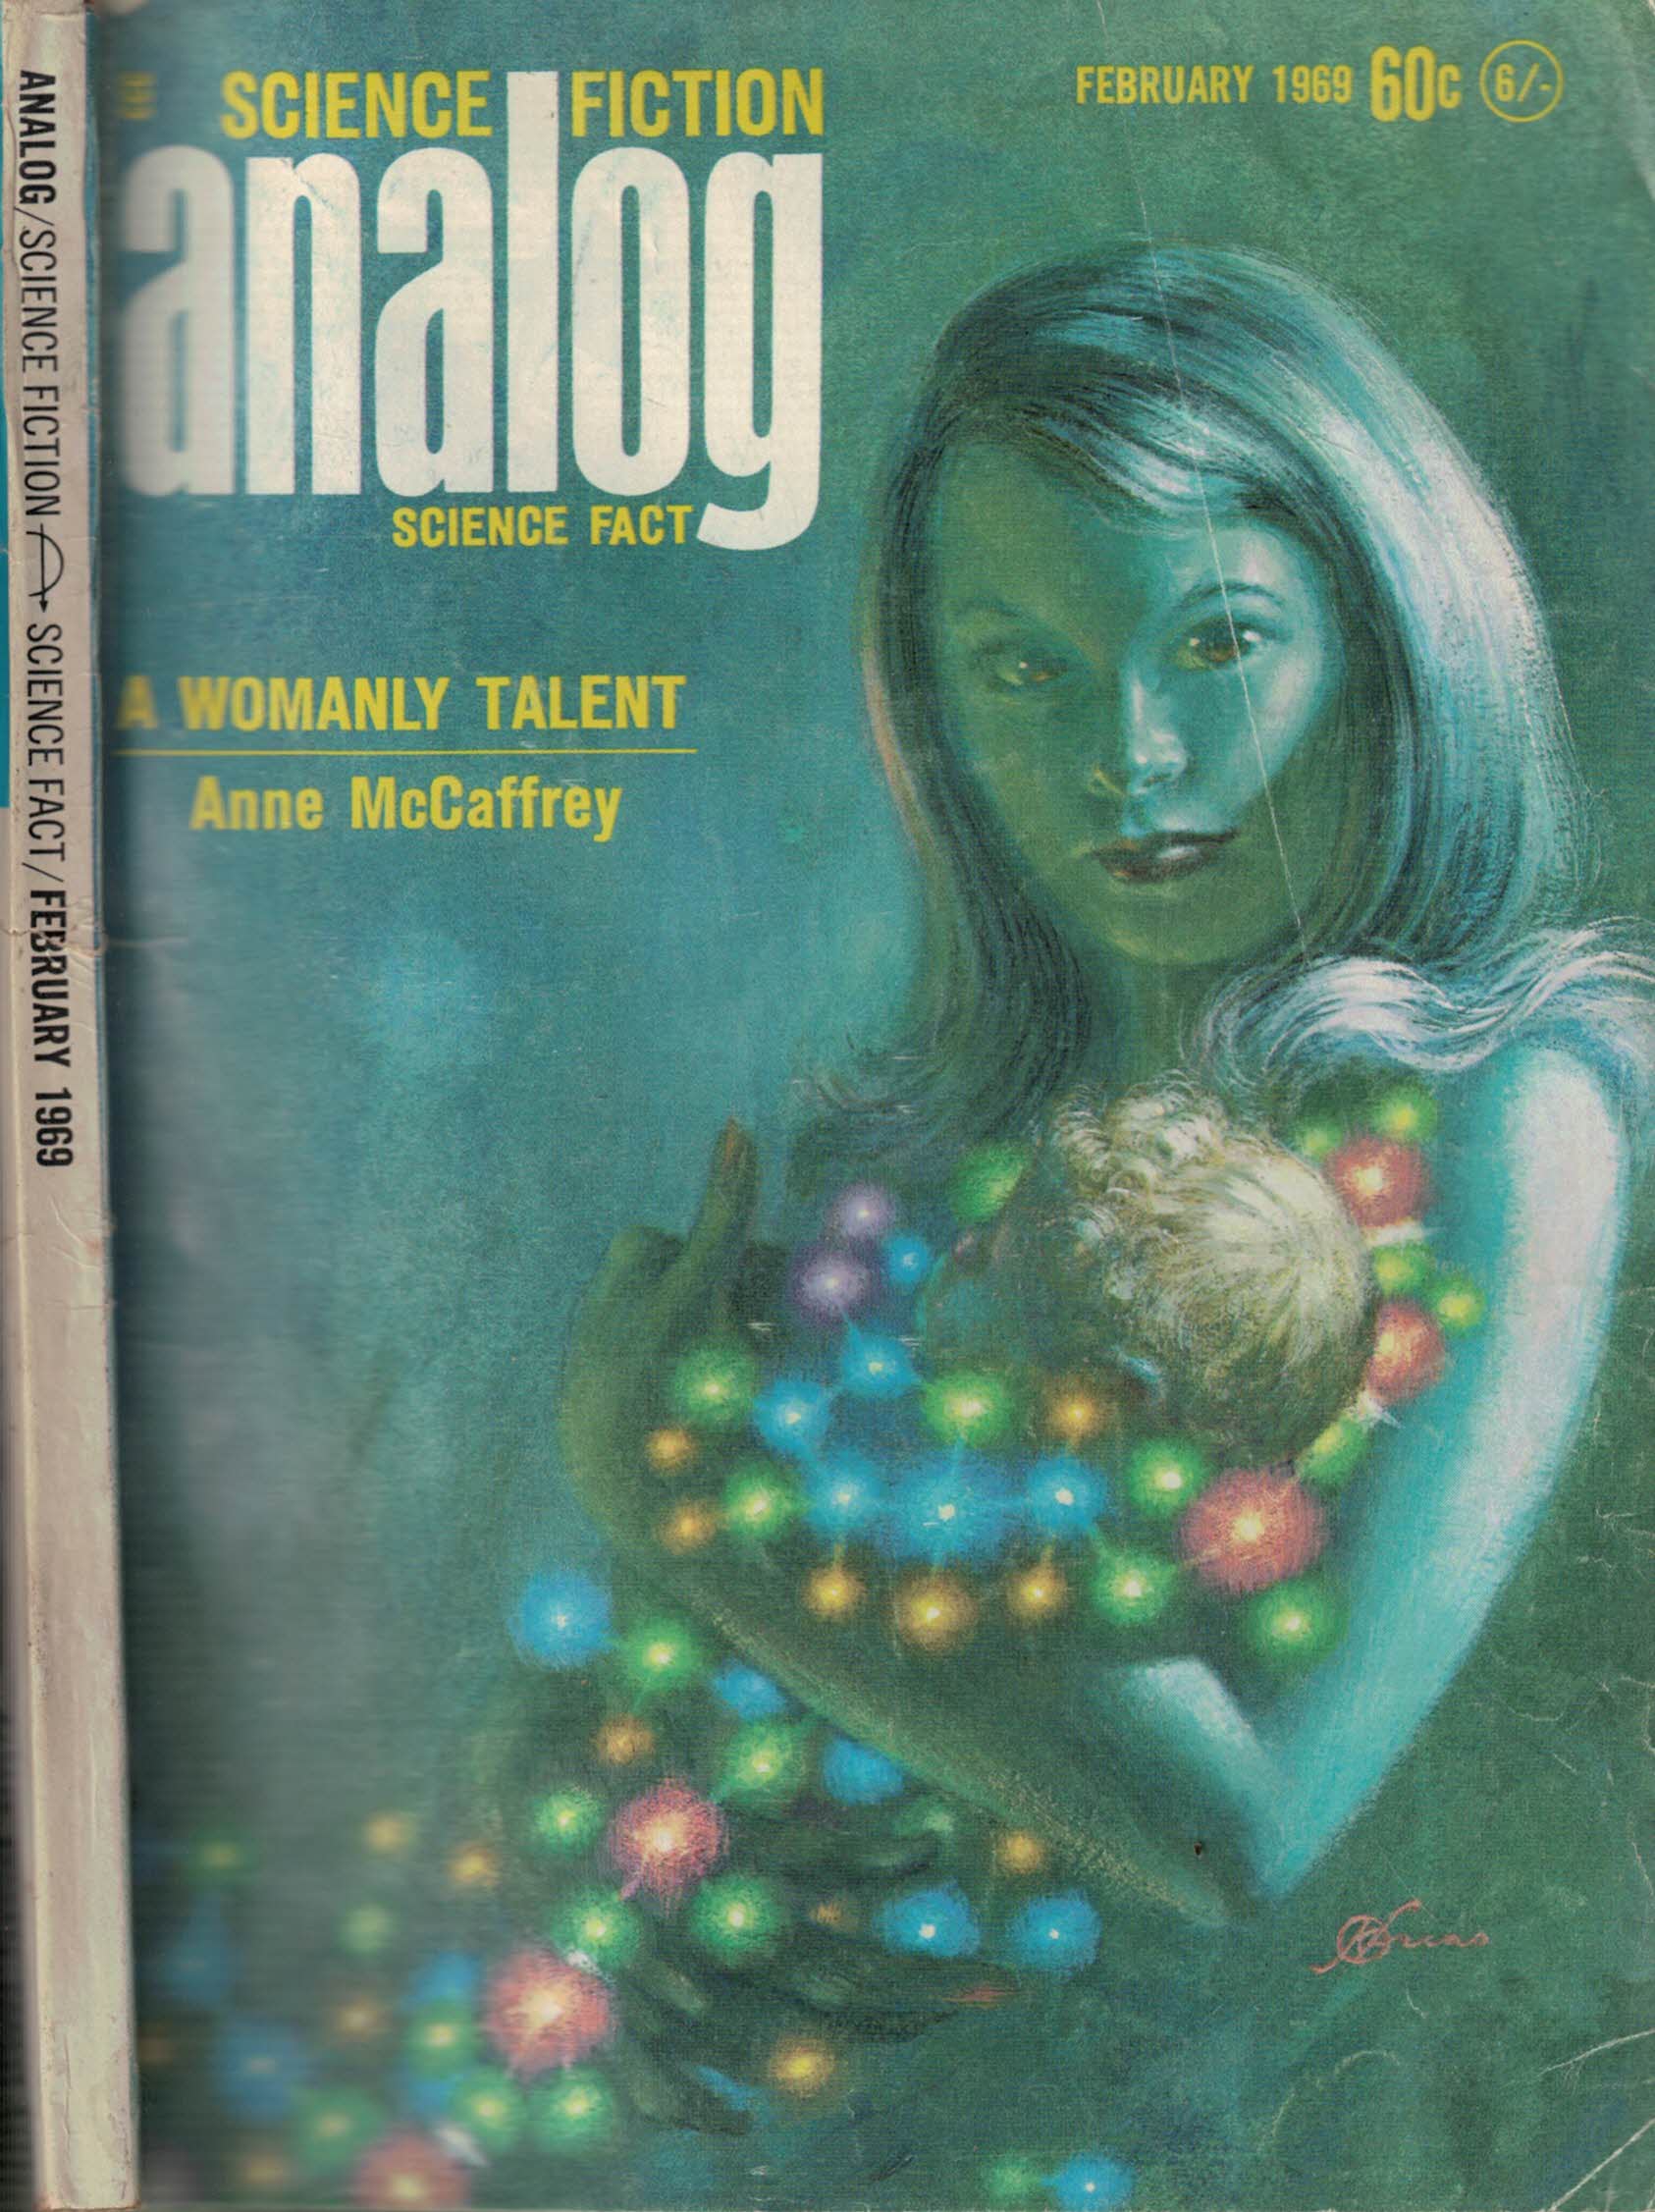 Analog. Science Fiction and Fact. Volume 82, Number 6. February 1969.